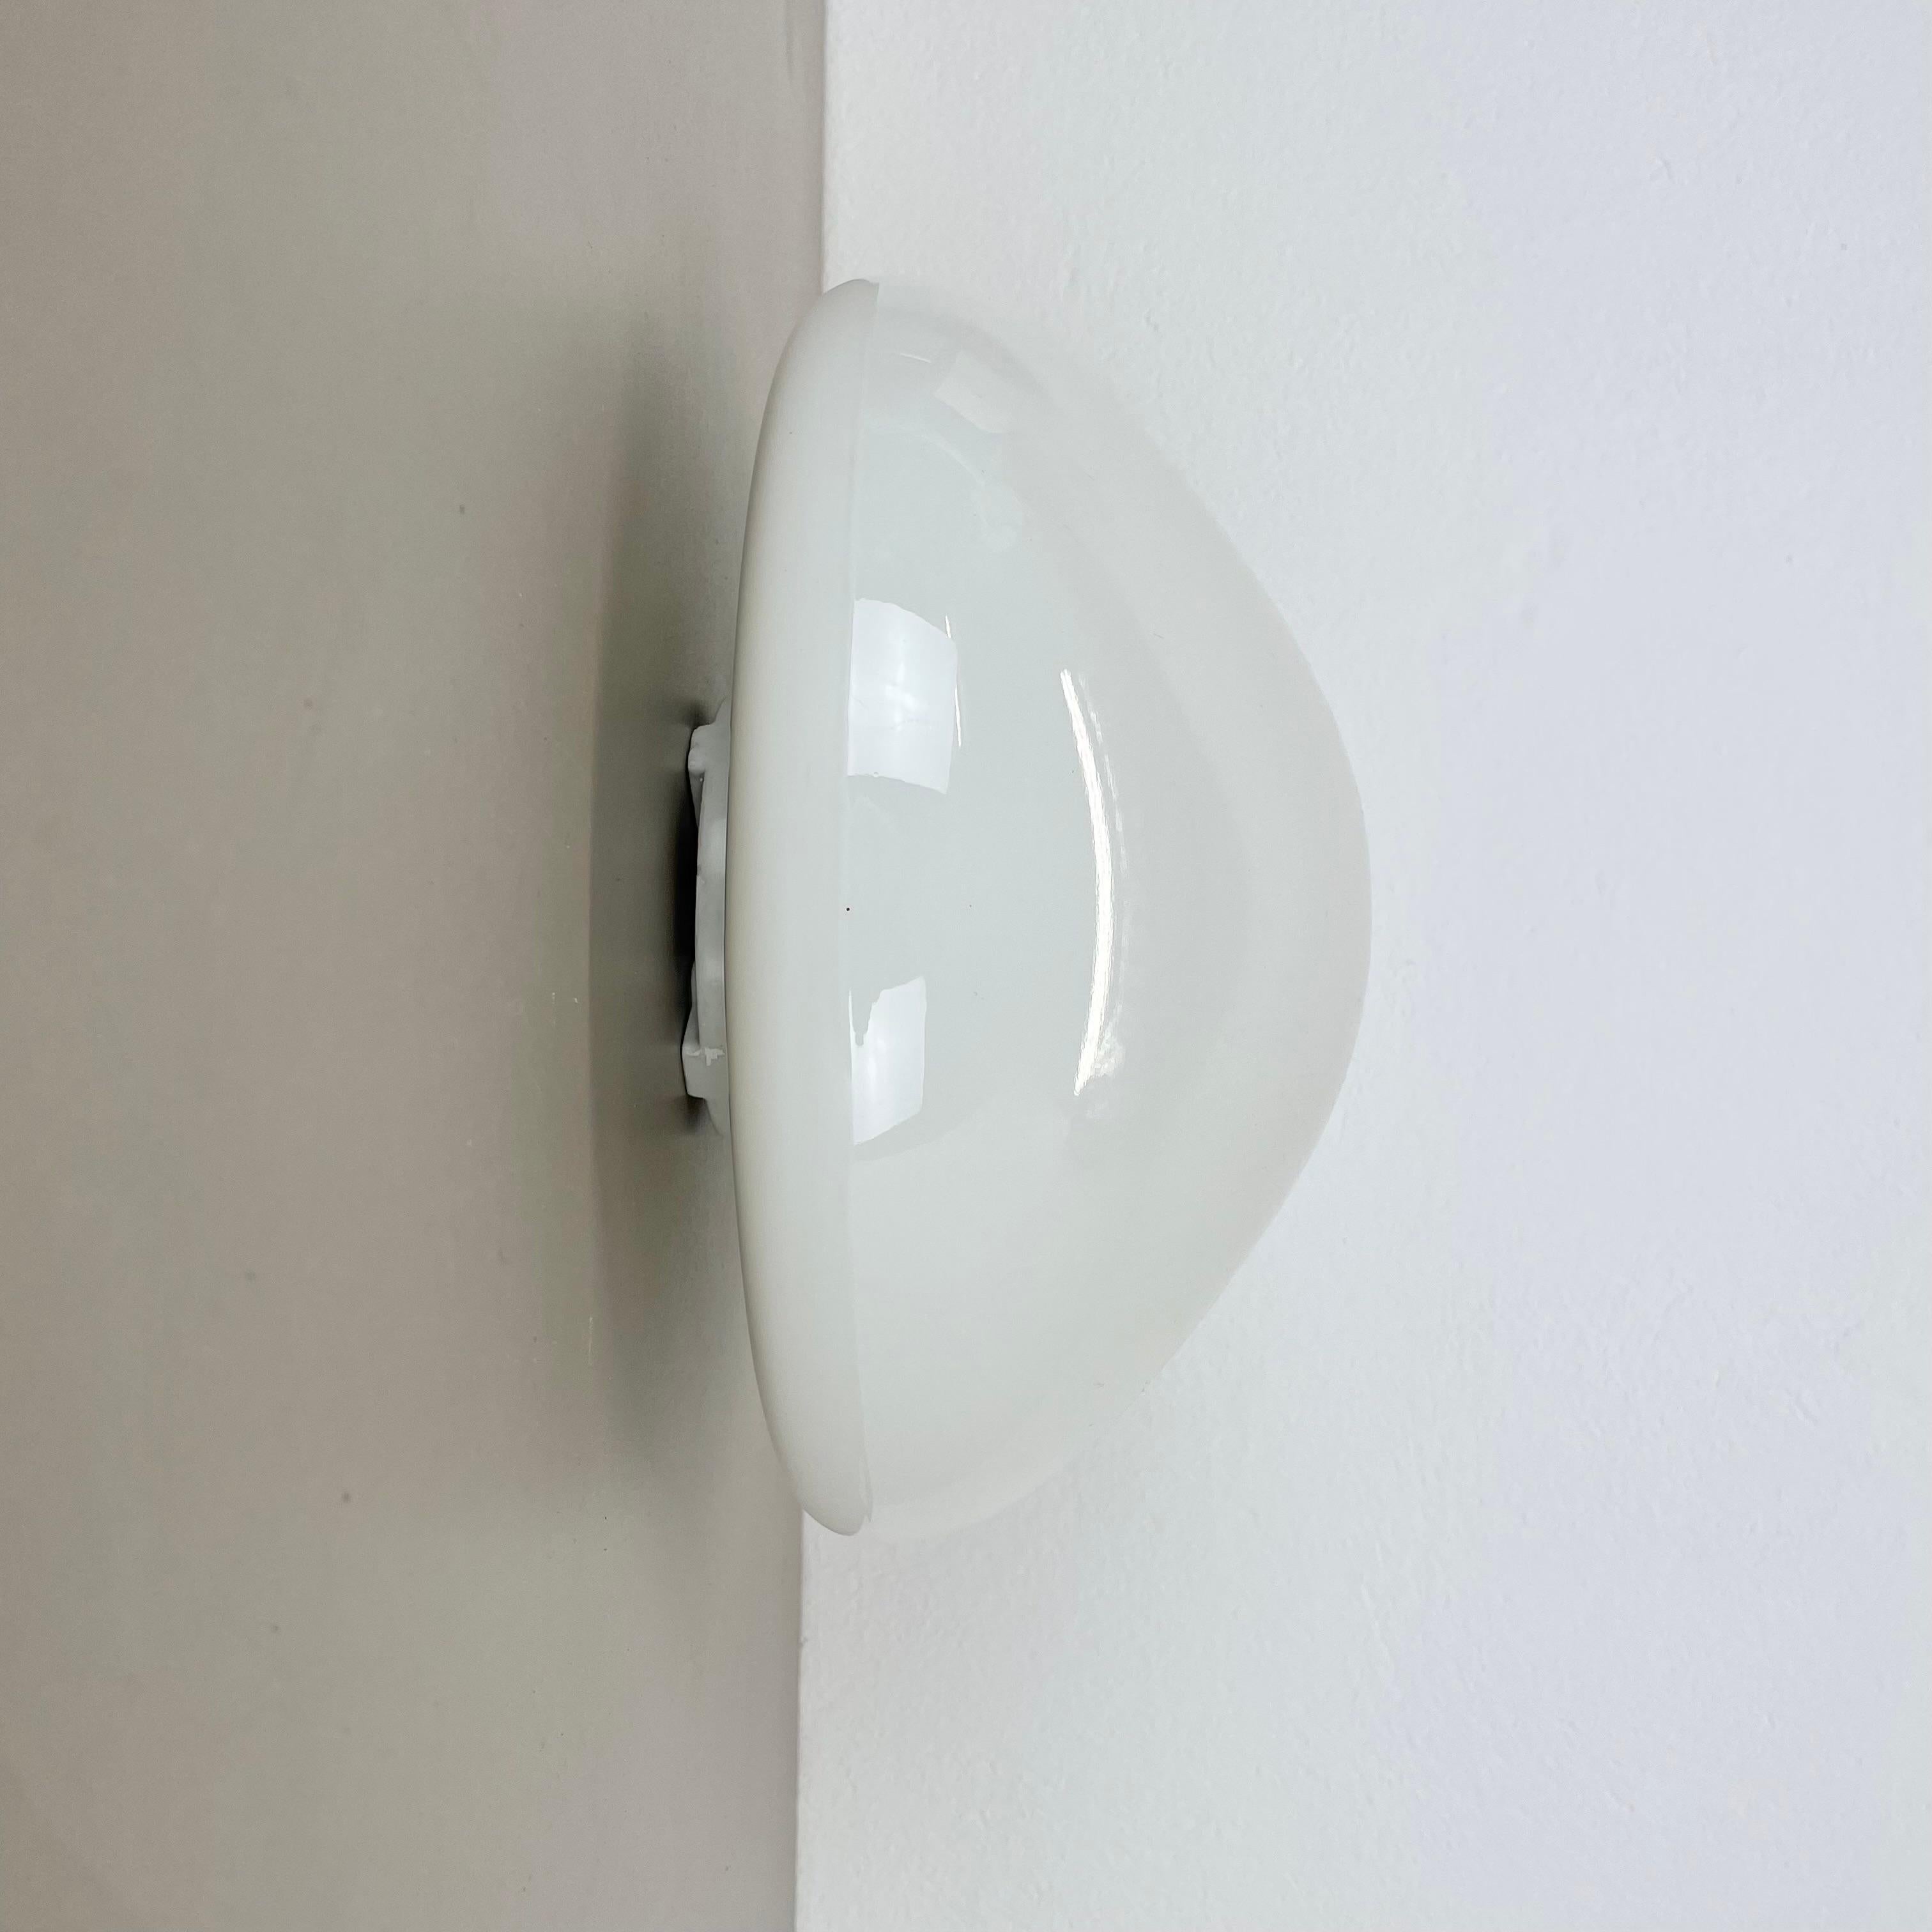 Article:

Porcelain glass wall light, ceiling light


Design:

Wilhelm Wagenfeld



Producer:

Lindner Gmbh, Germany



Age:

1950s


Model:

WV 339





Original wall light designed by Wilhelm Wagenfeld and produced by Lindner Gmbh, Germany in the